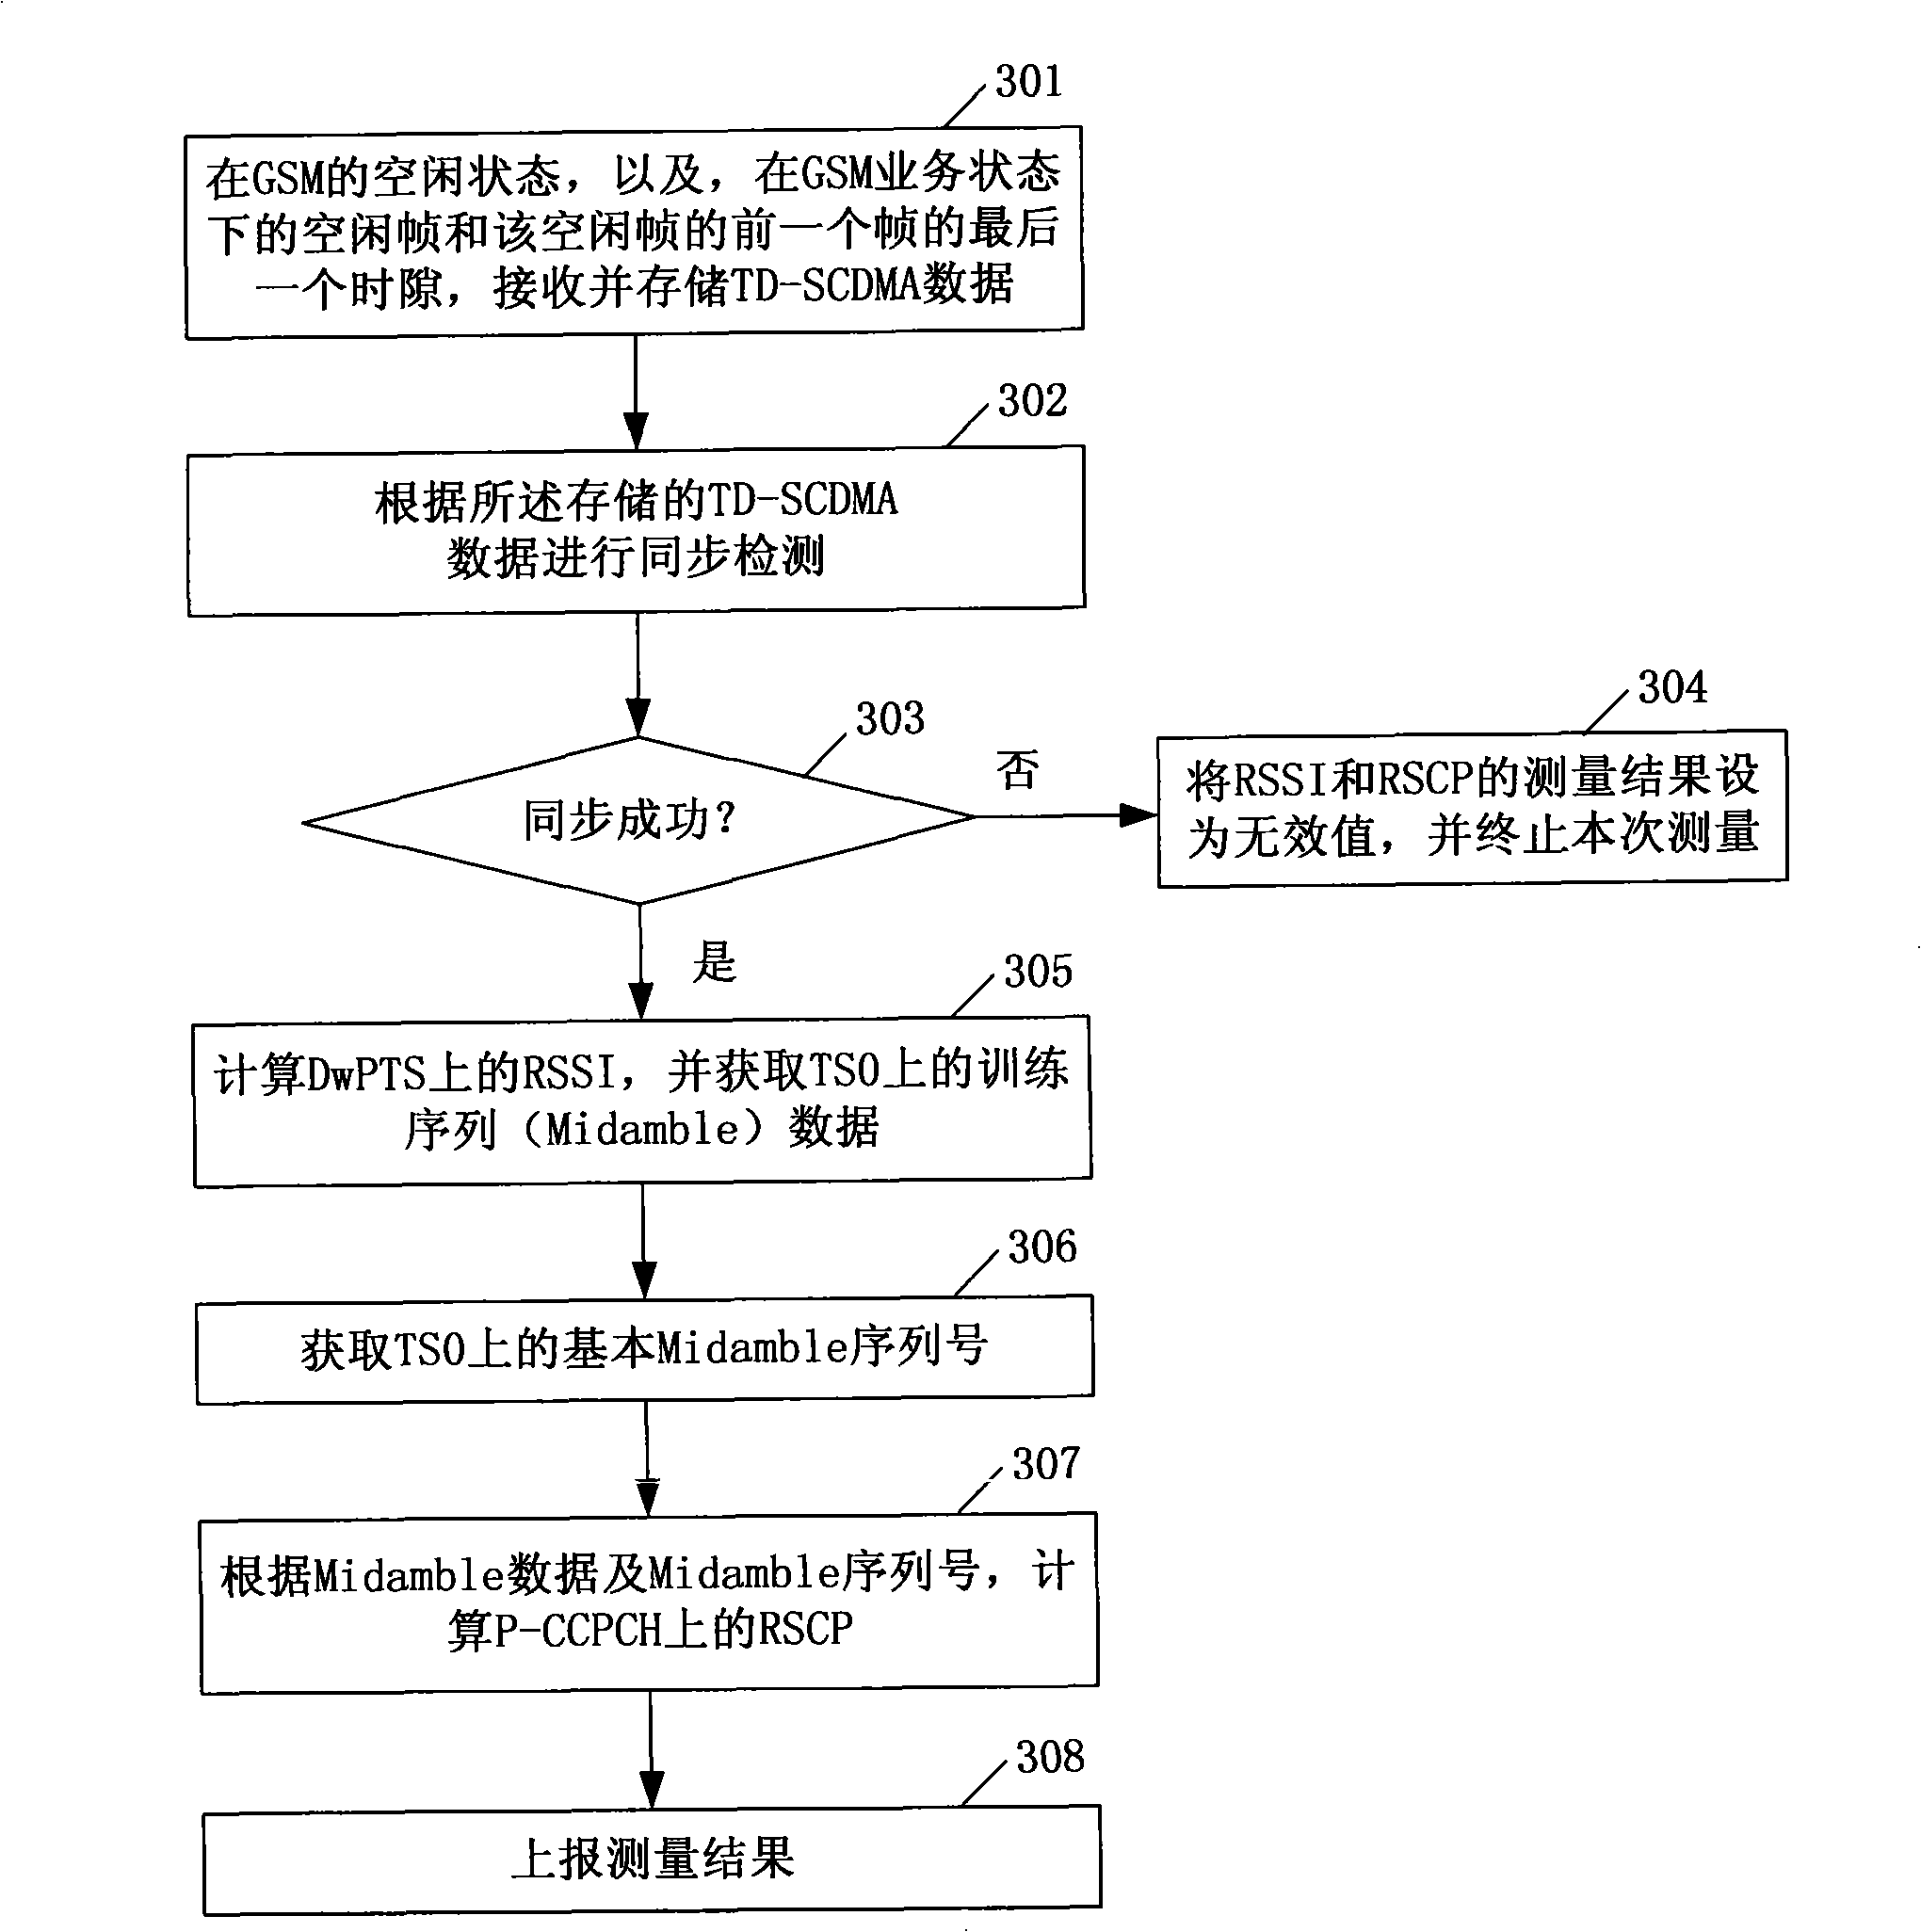 Method for measuring TD-SCDMA network by GSM/TD-SCDMA double-mode terminal with GSM mode